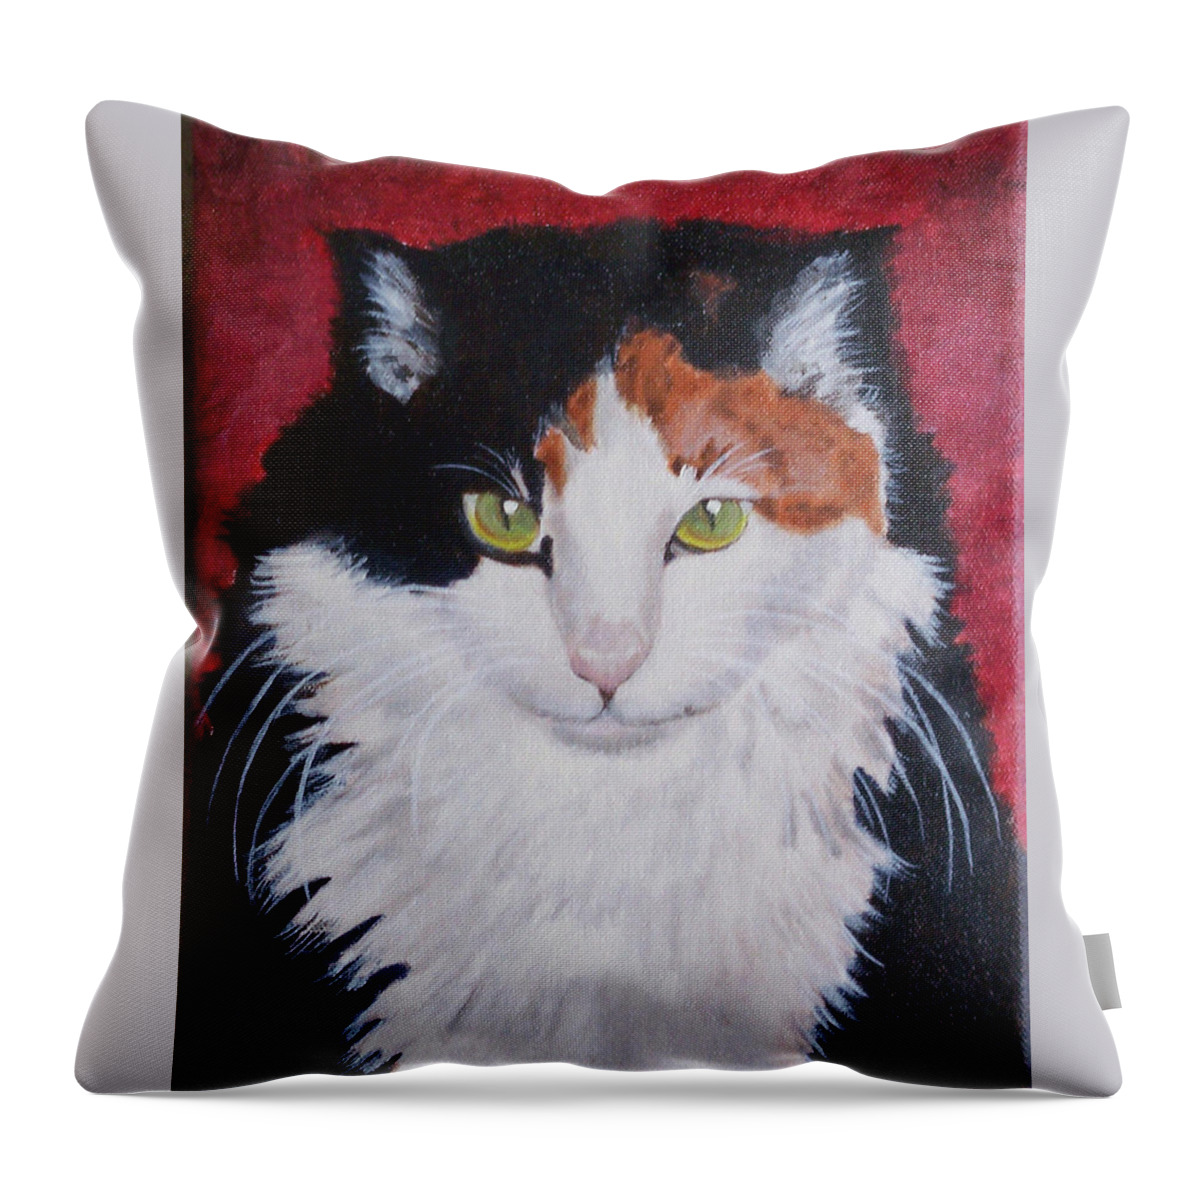 Pets Throw Pillow featuring the painting Alley Cat by Kathie Camara